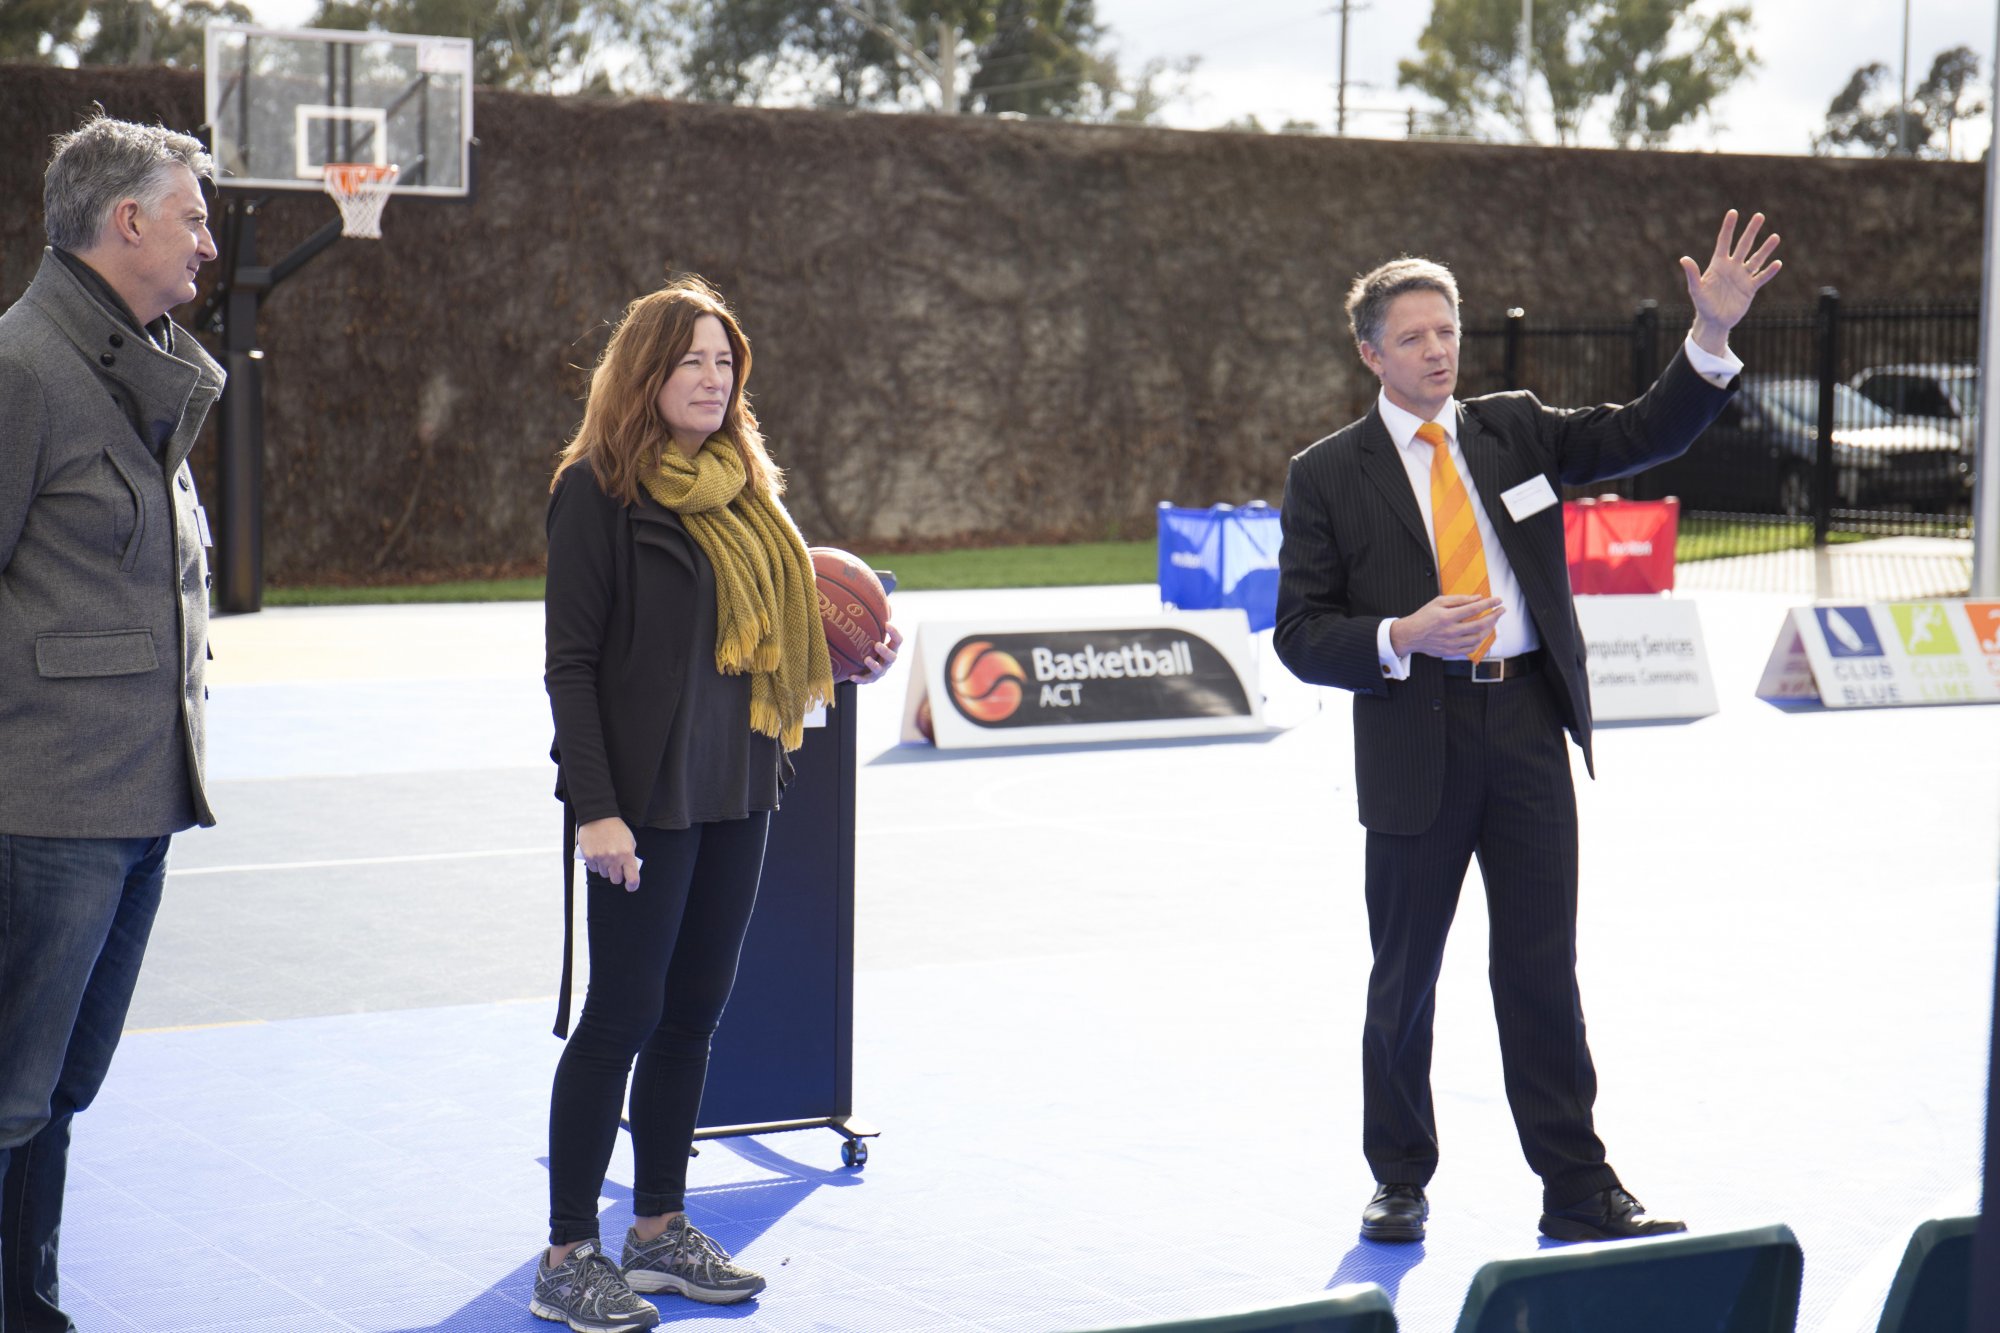 Basketball ACT welcomes Australia's first FIBA standard 3x3 outdoor courts